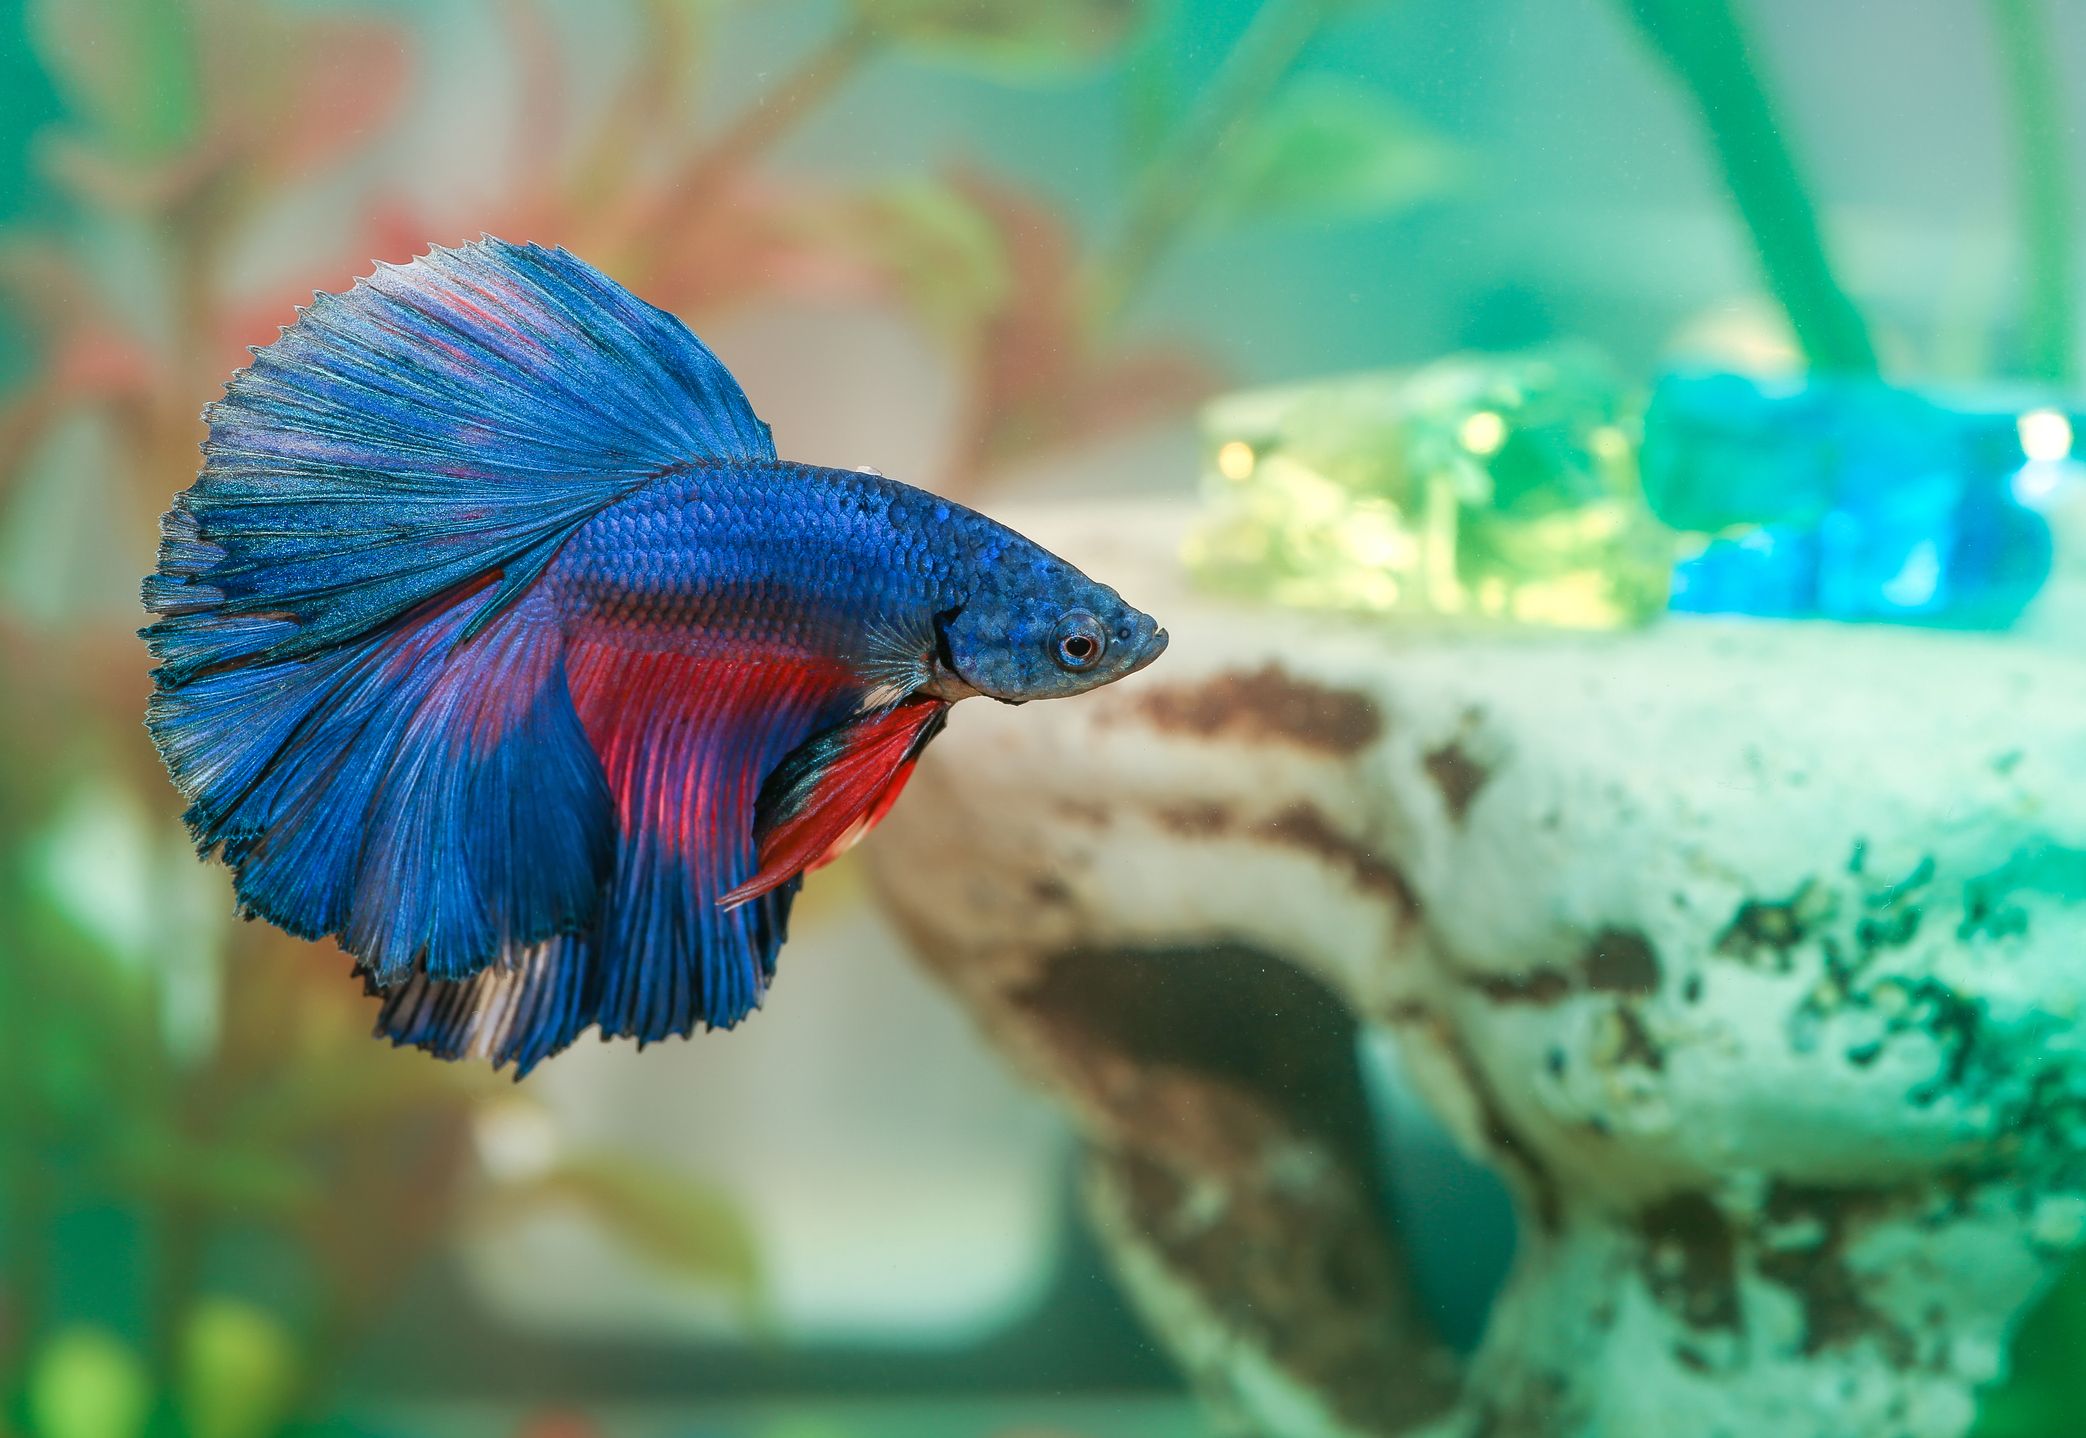 200+ Great Name Ideas for Your Pet Fish